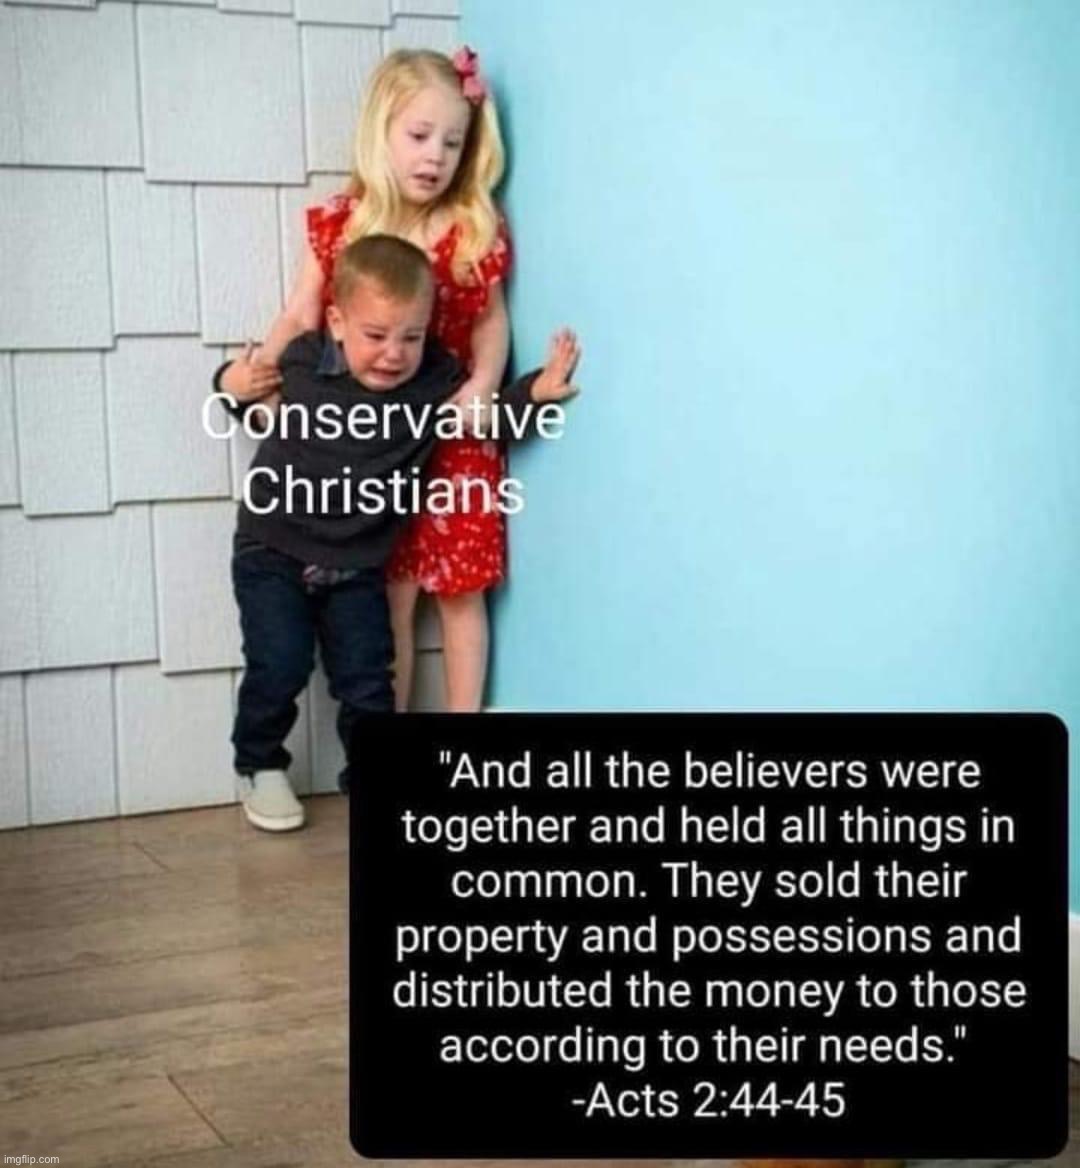 no that verse is wrong, delete & smite them God thx | image tagged in conservative christians vs acts 2 44-45,delete,and,smite,them,thx | made w/ Imgflip meme maker